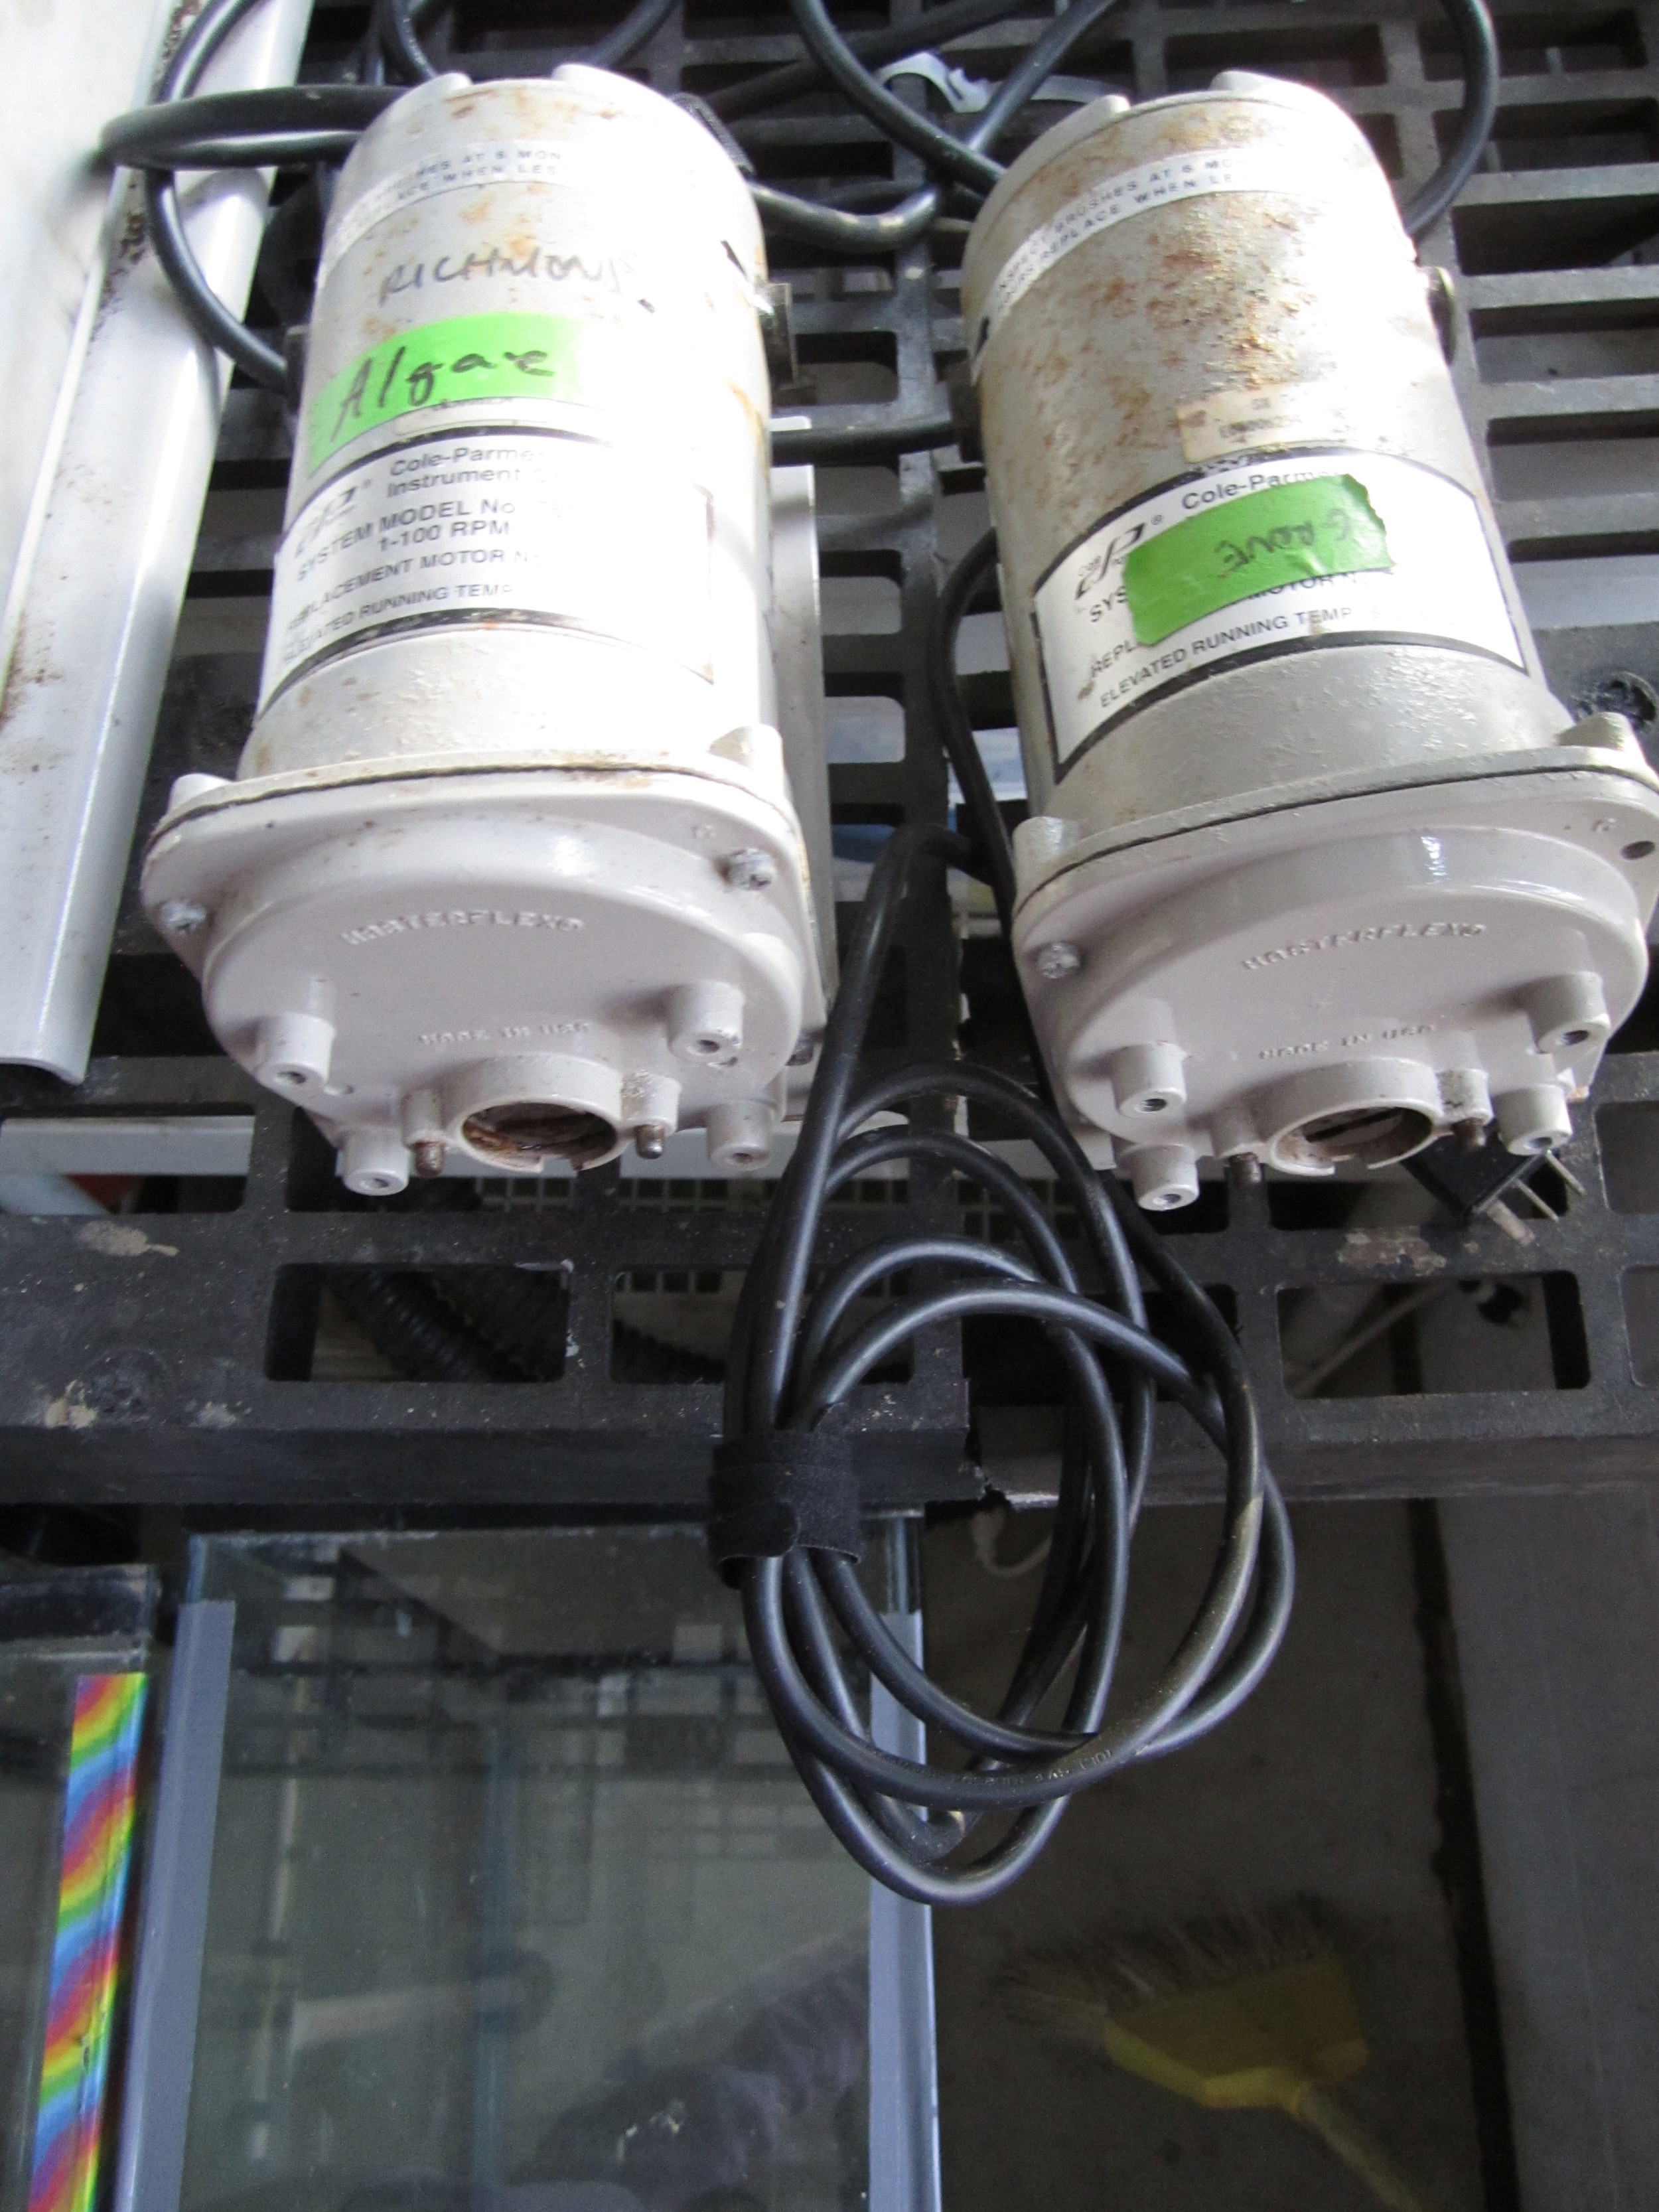 velcoro ties organize electrical cords of peristaltic pumps